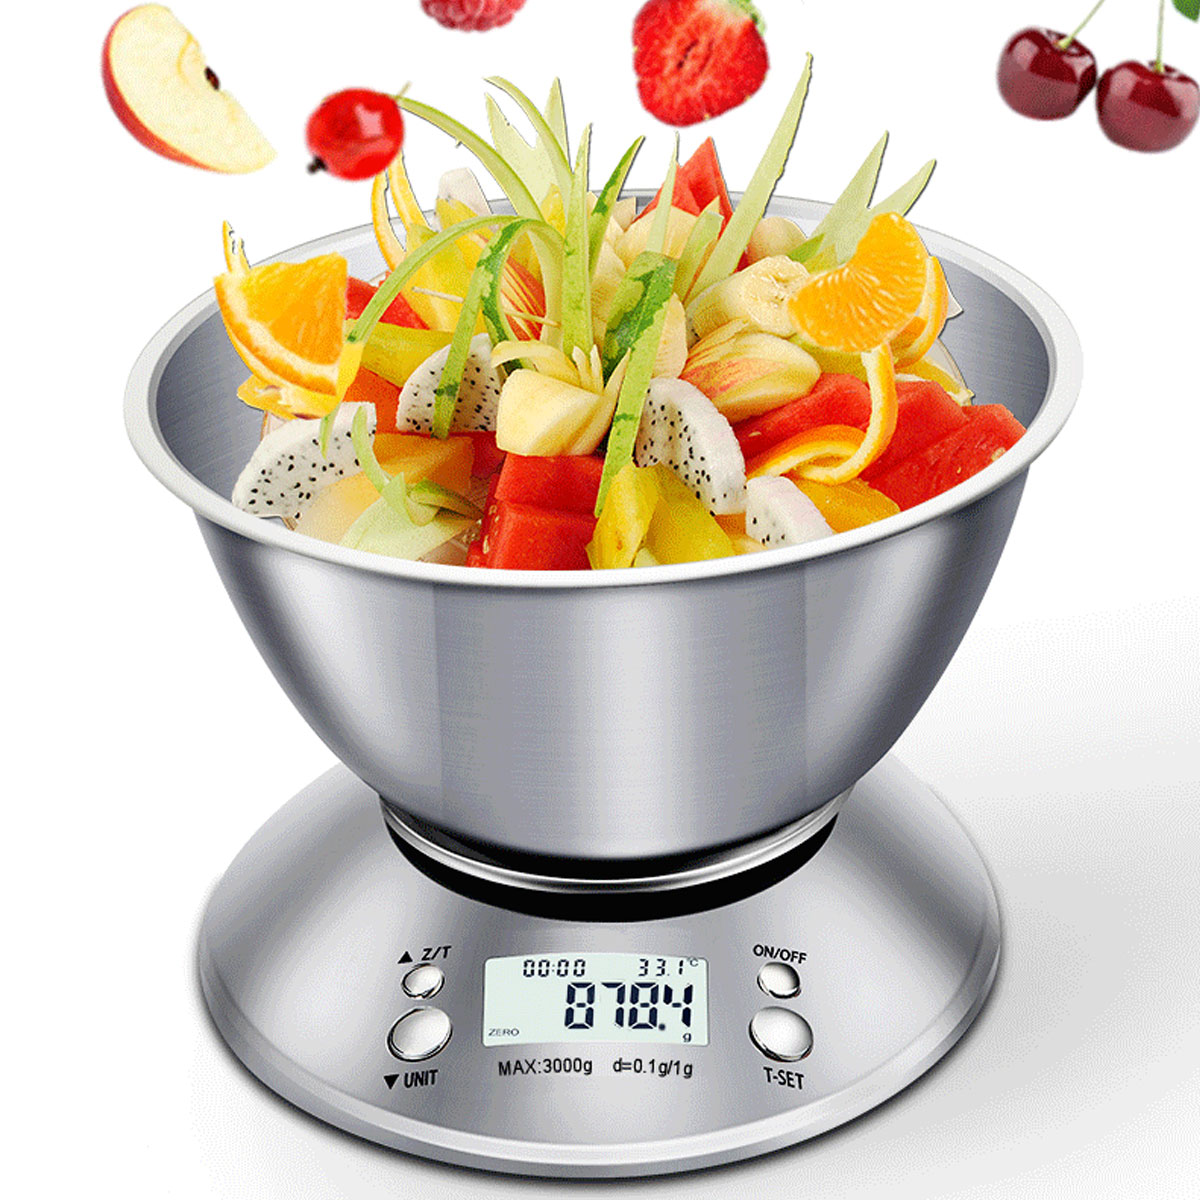 Digital-Kitchen-Scale-LCD-Display-Stainless-Steel-Baking-High-Precision-Removable-Kitchen-Scale-1859940-11